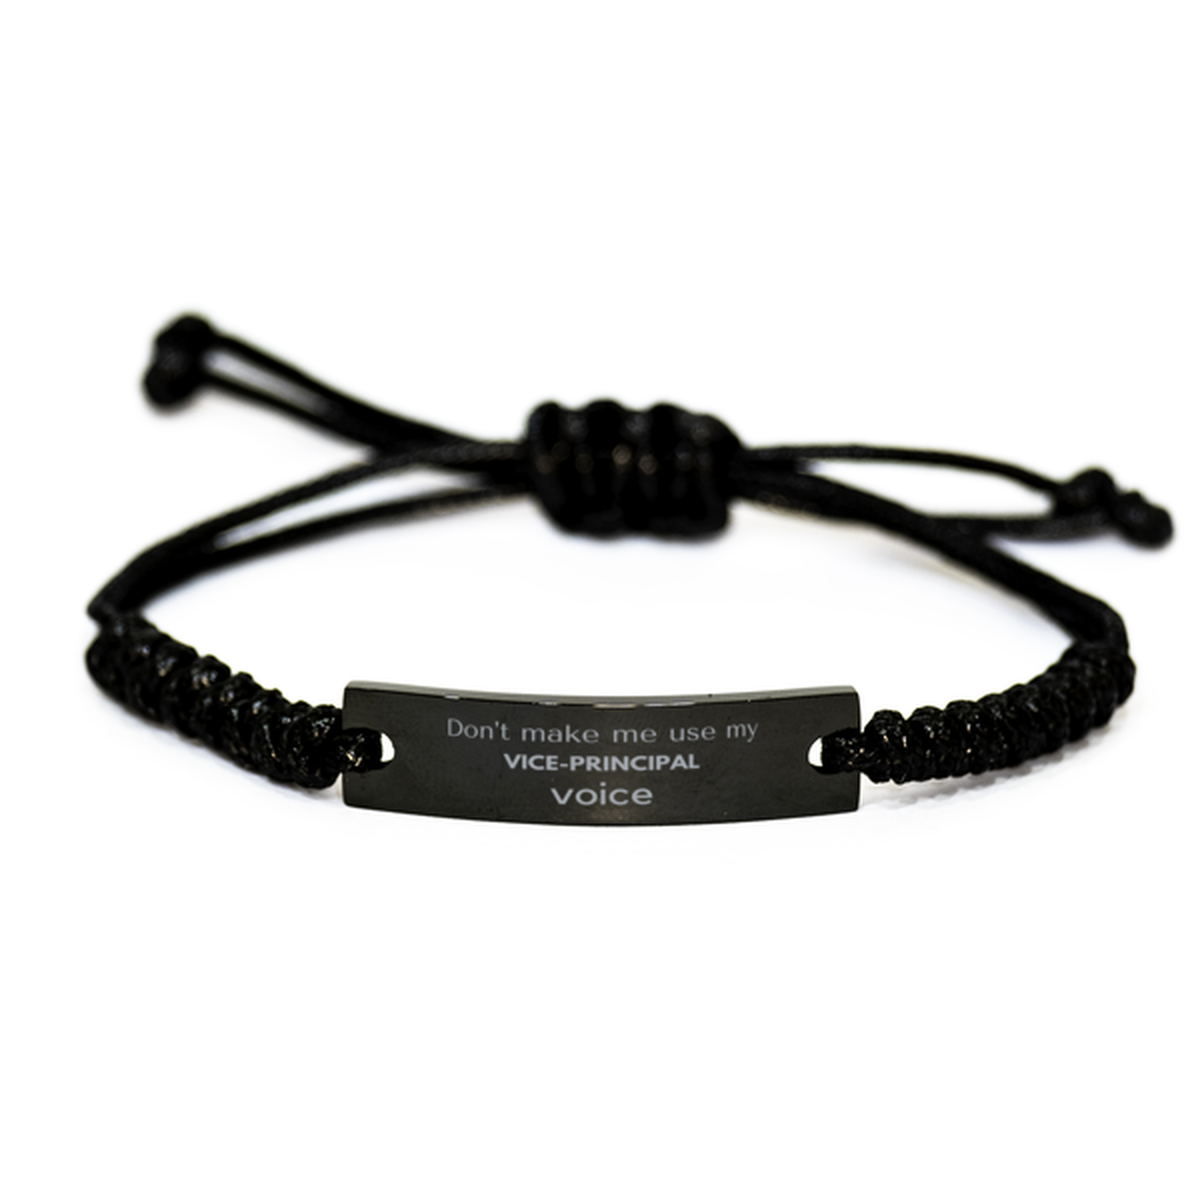 Don't make me use my Vice-principal voice, Sarcasm Vice-principal Gifts, Christmas Vice-principal Black Rope Bracelet Birthday Unique Gifts For Vice-principal Coworkers, Men, Women, Colleague, Friends